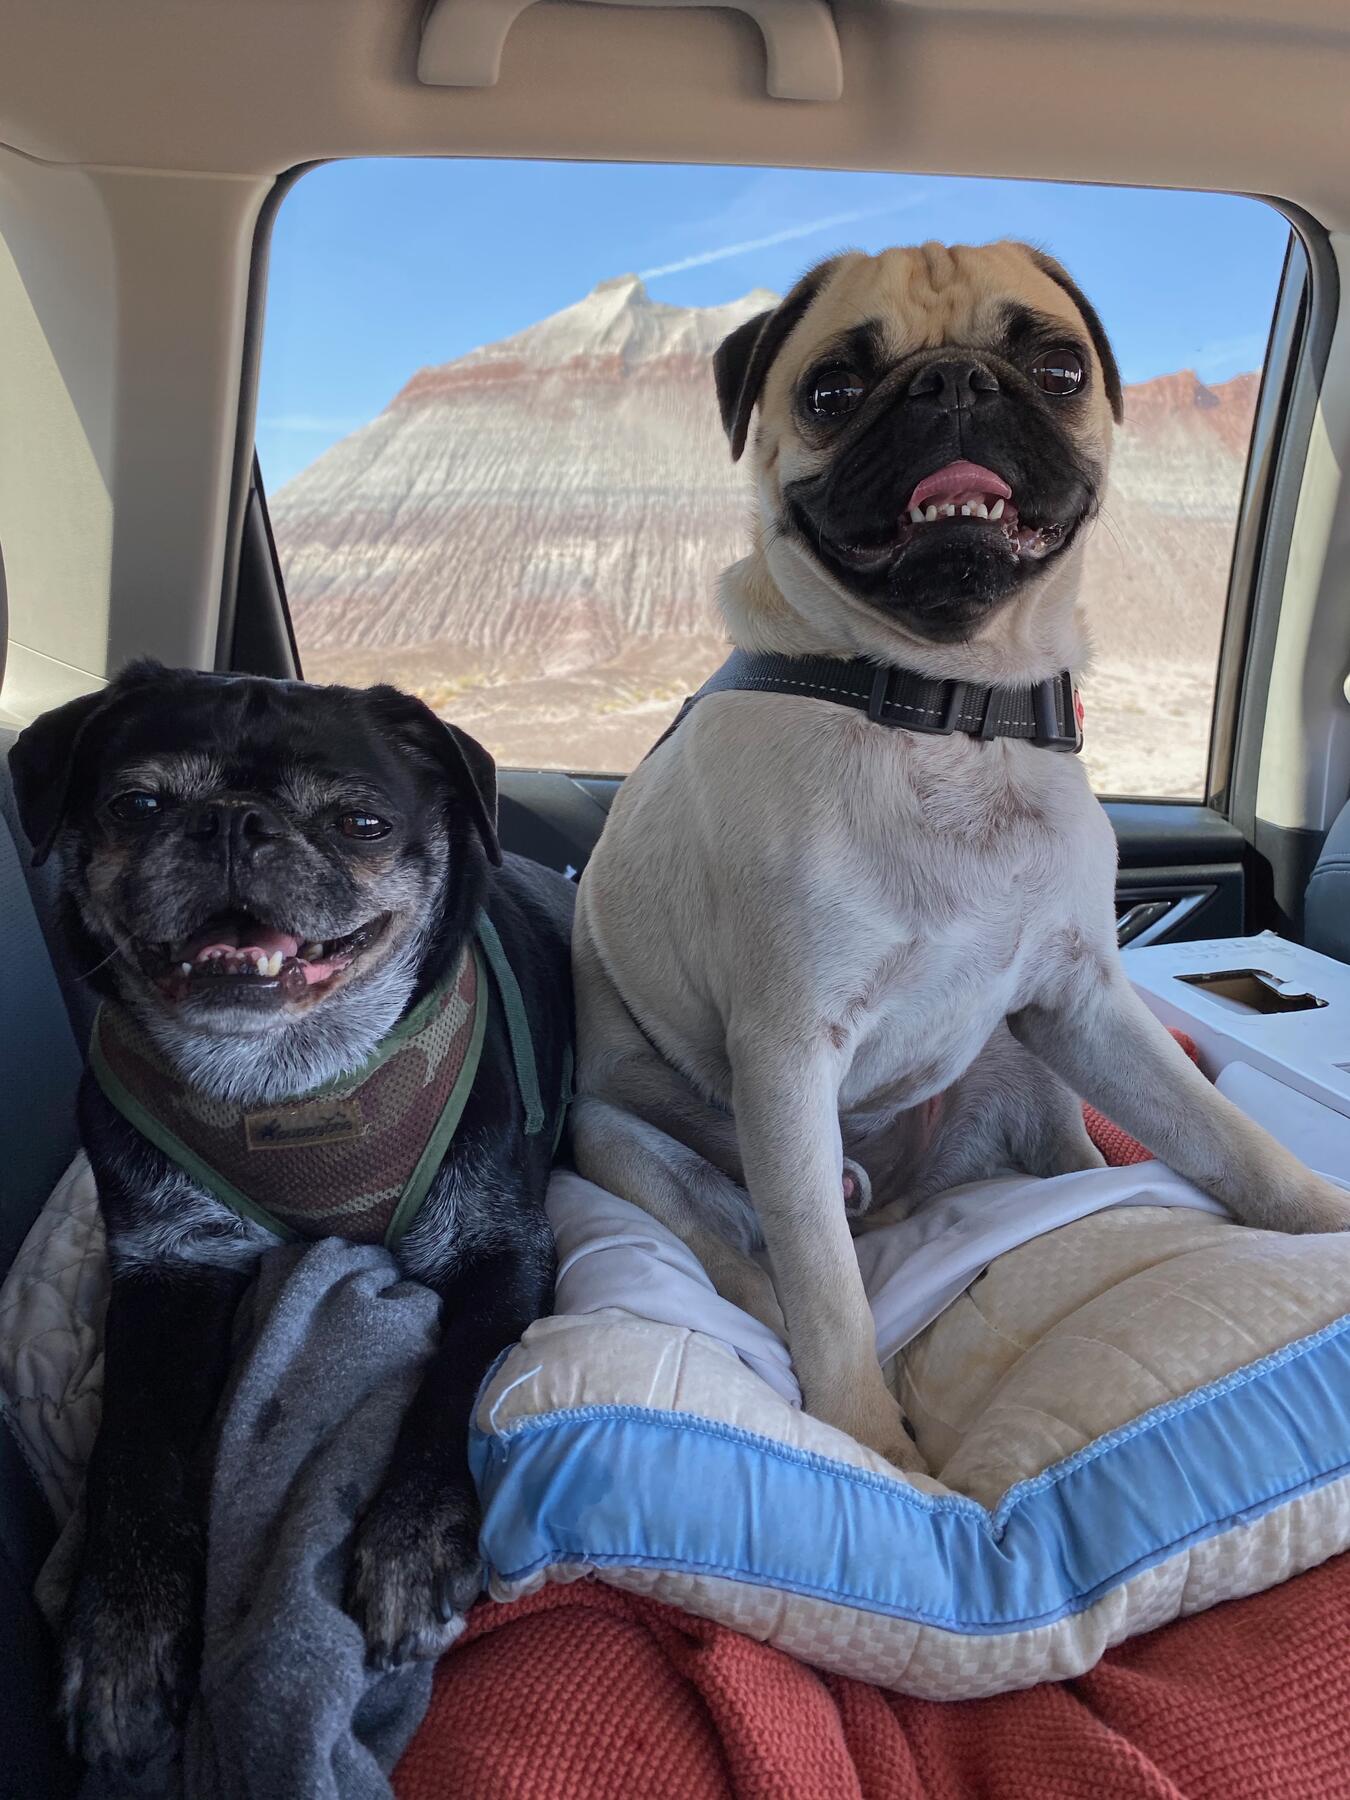 Bear and Ted in The Petrified Forest, Arizona